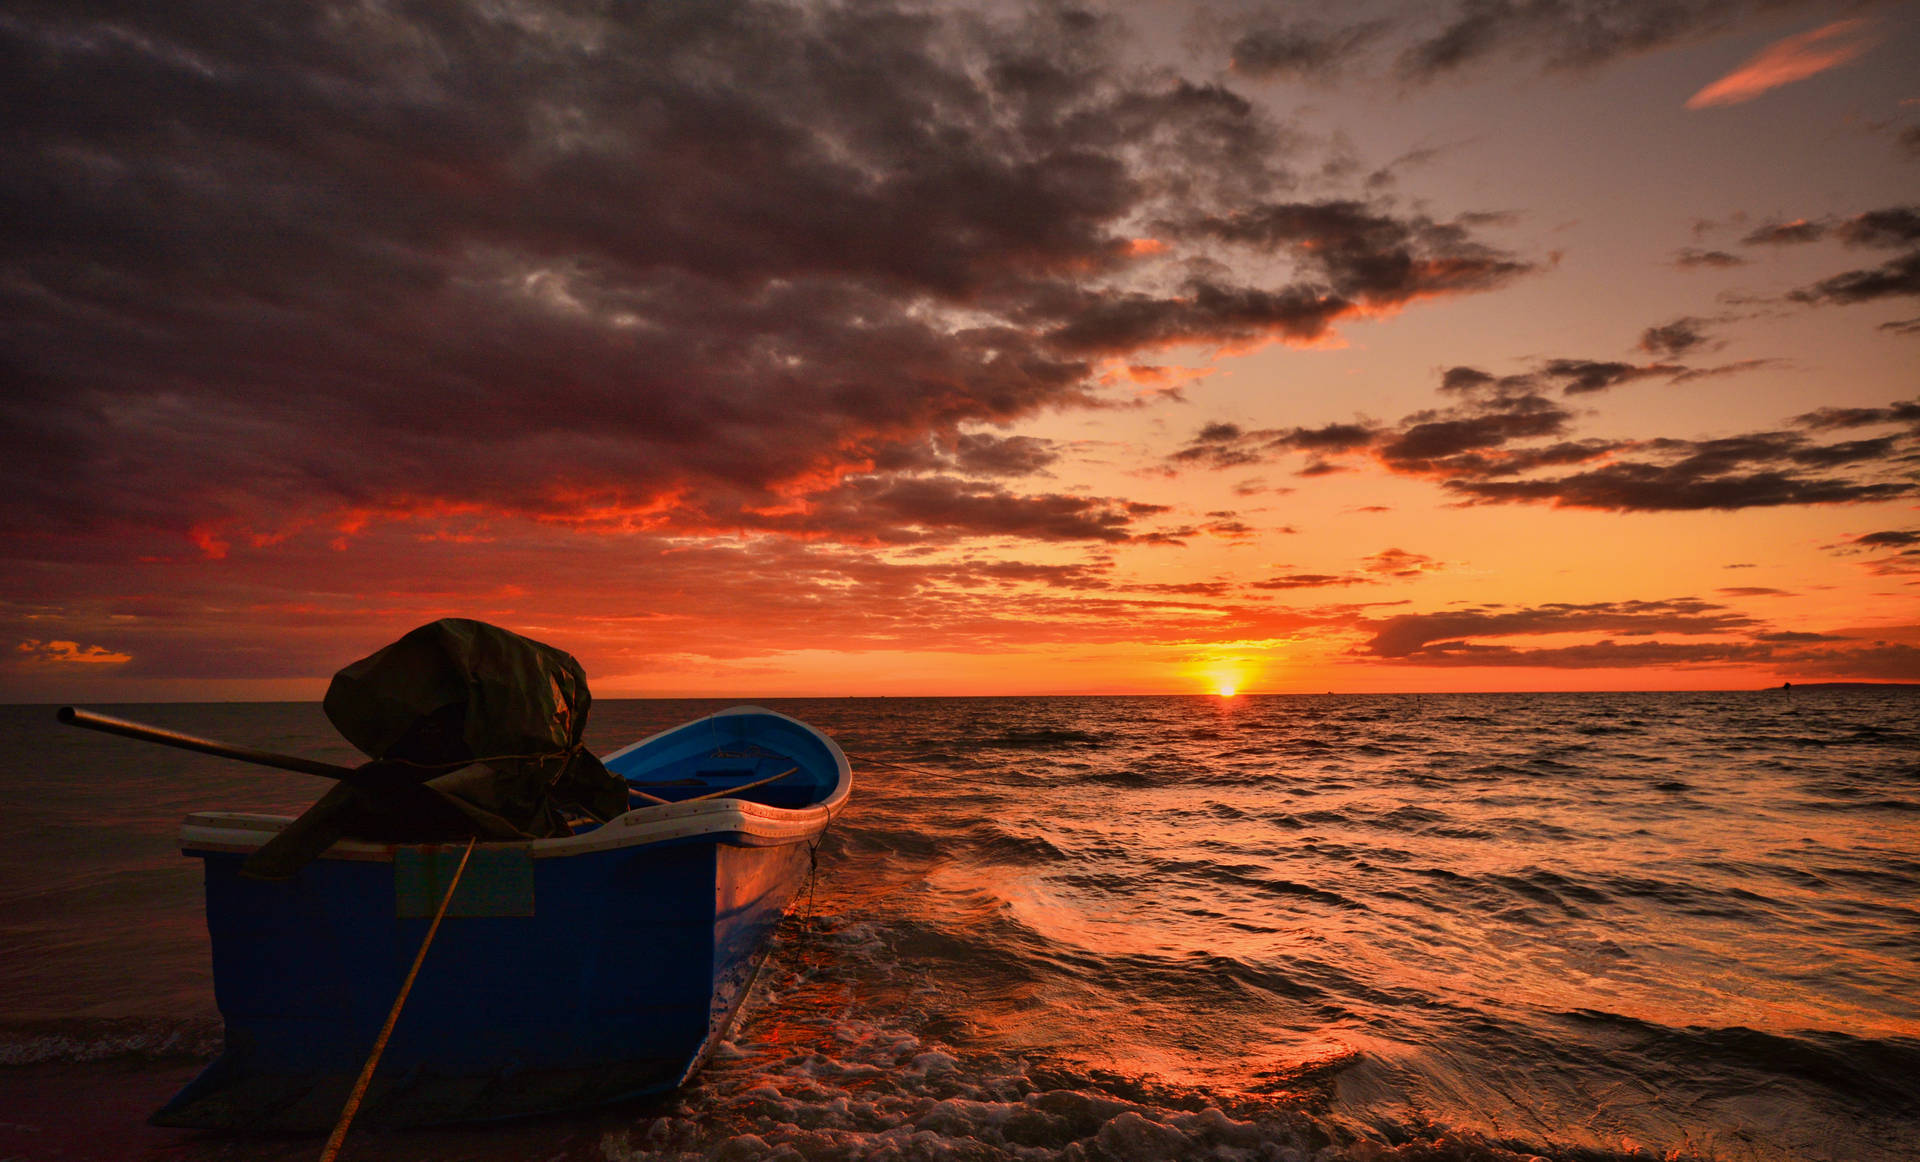 Cambodia Boat And Sunset Wallpaper